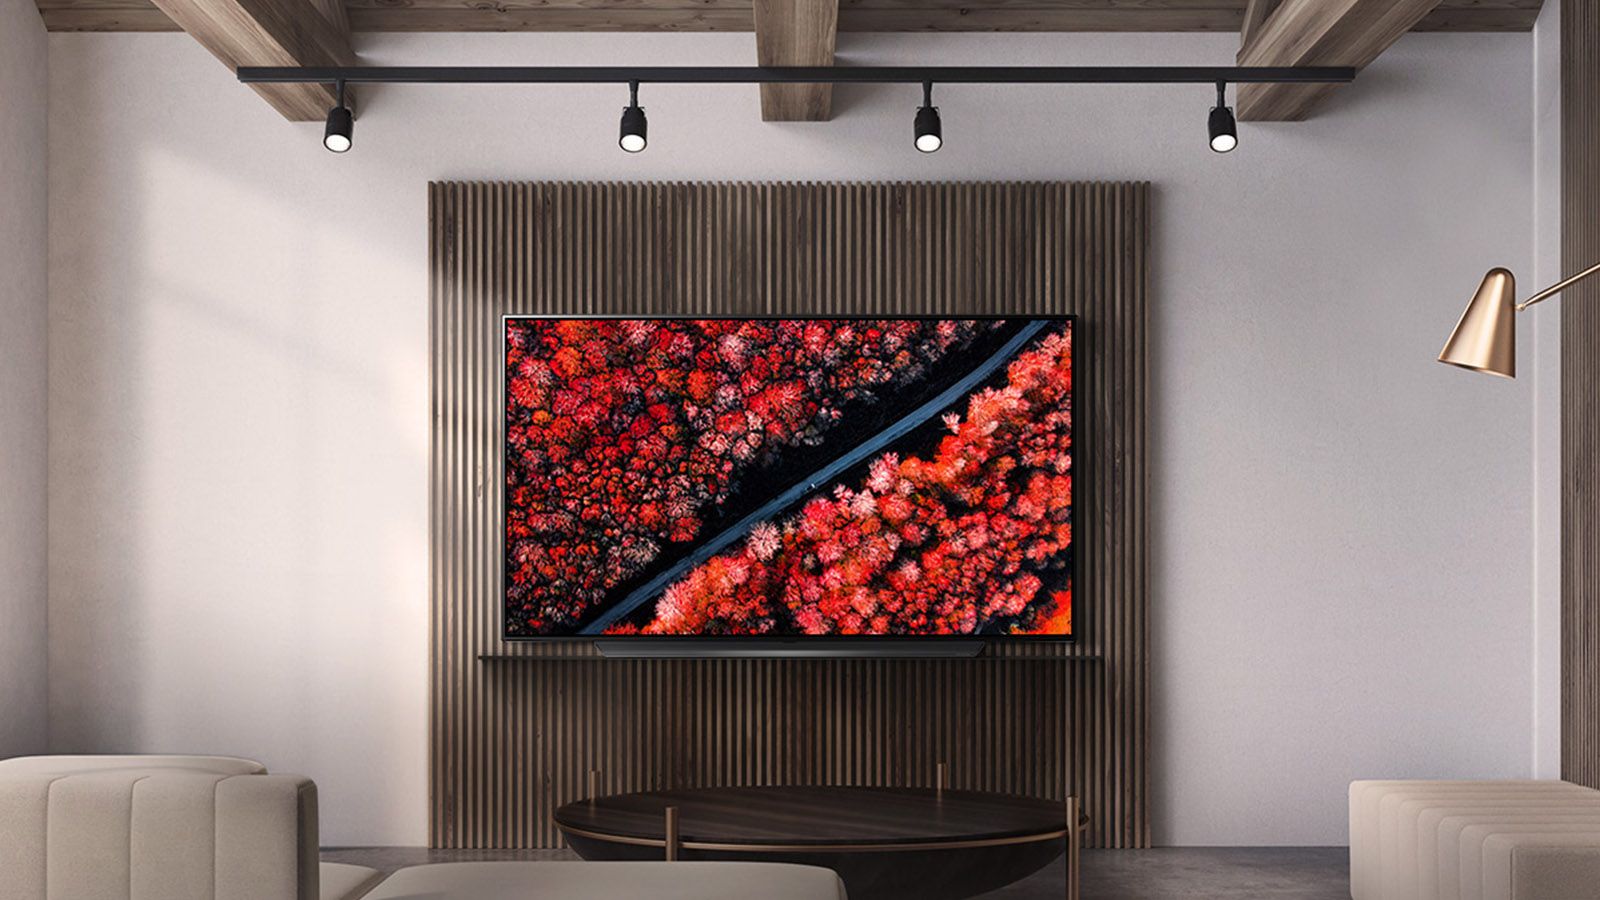 Lg Oled C9 Tv Review image 1